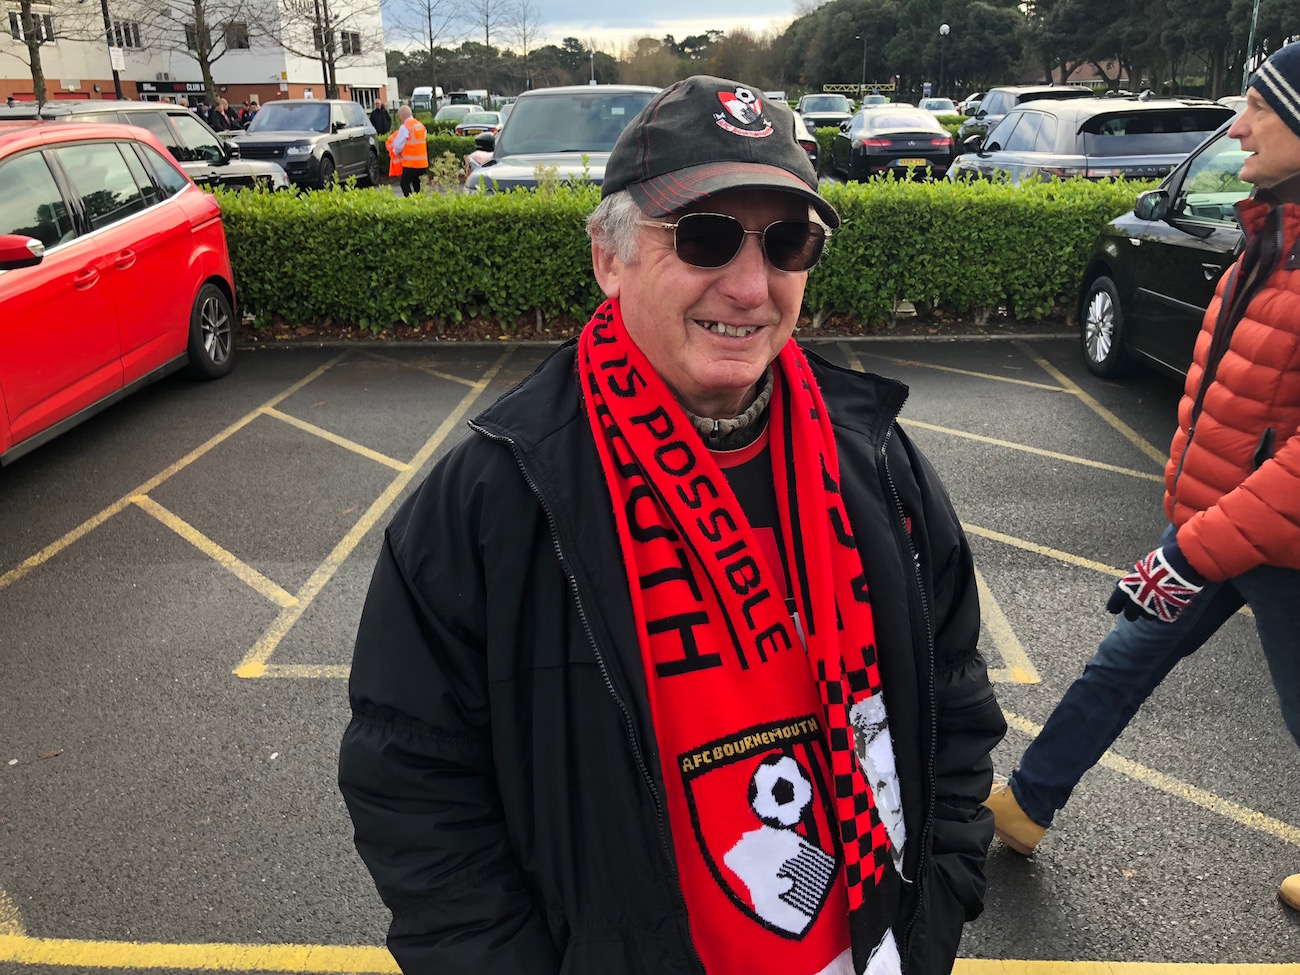 AFC Bournemouth supporter outside Vitality stadium